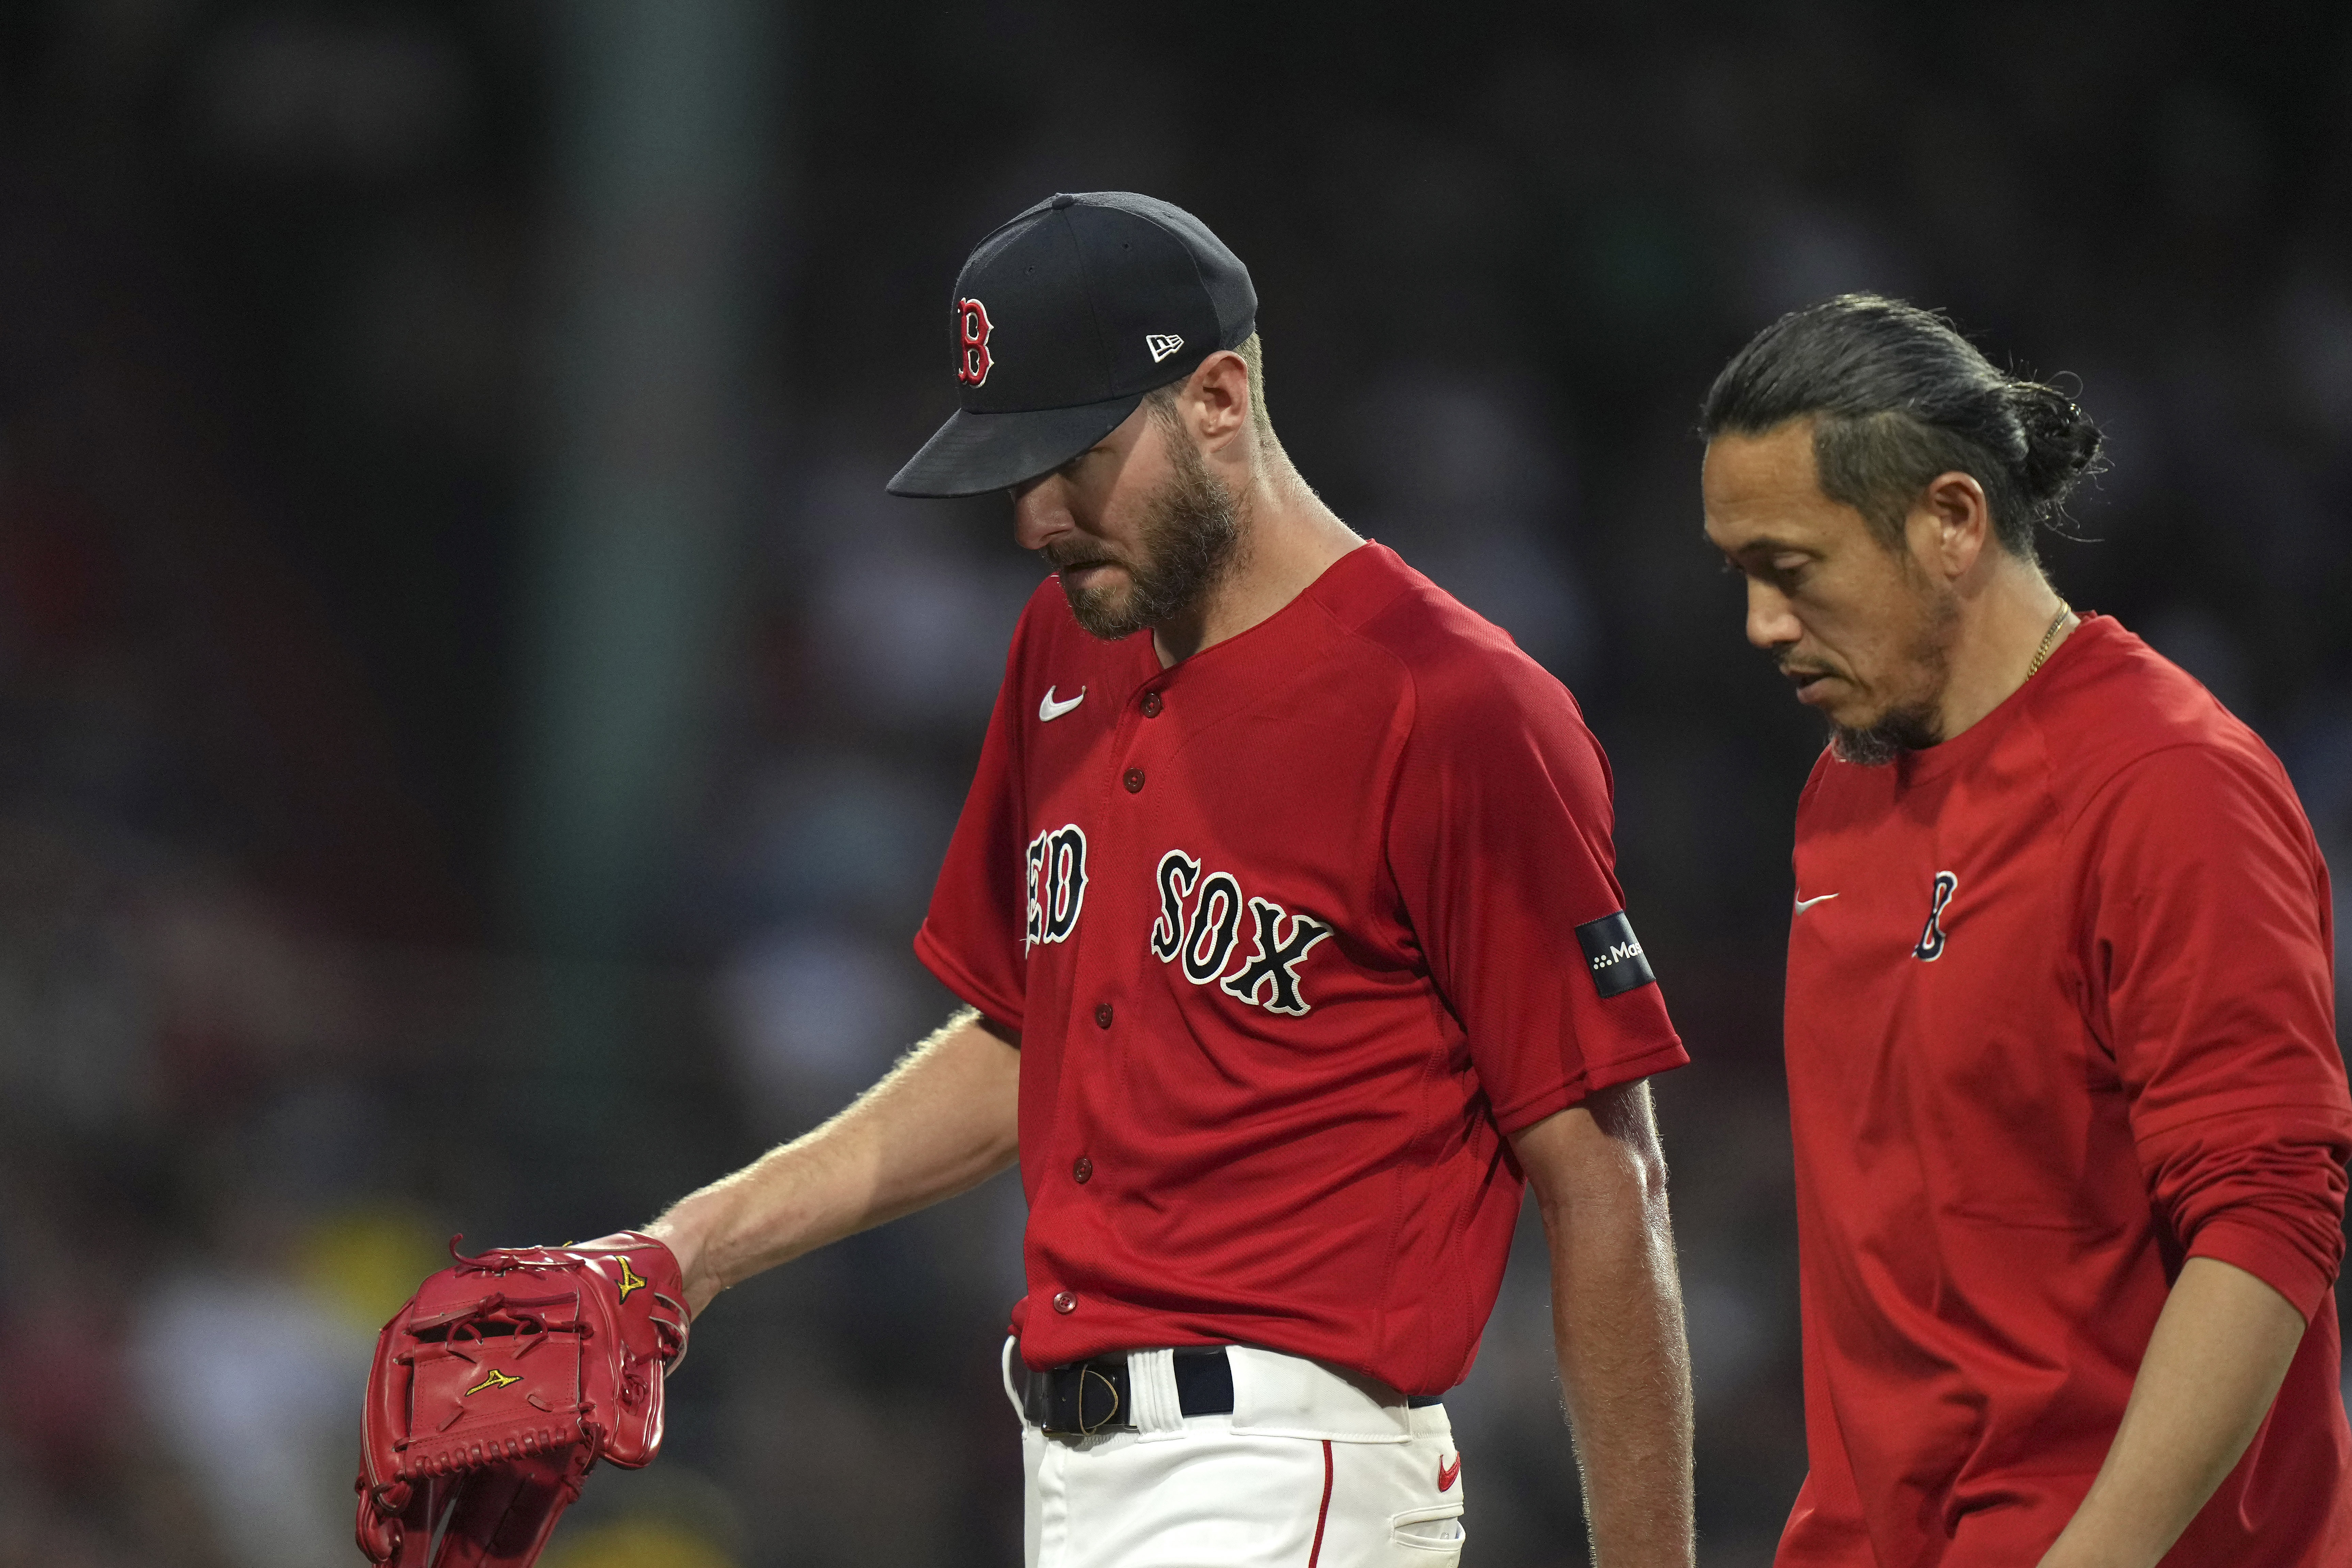 Red Sox outfielder Adam Duvall lands on IL due to broken wrist, out for  extended period